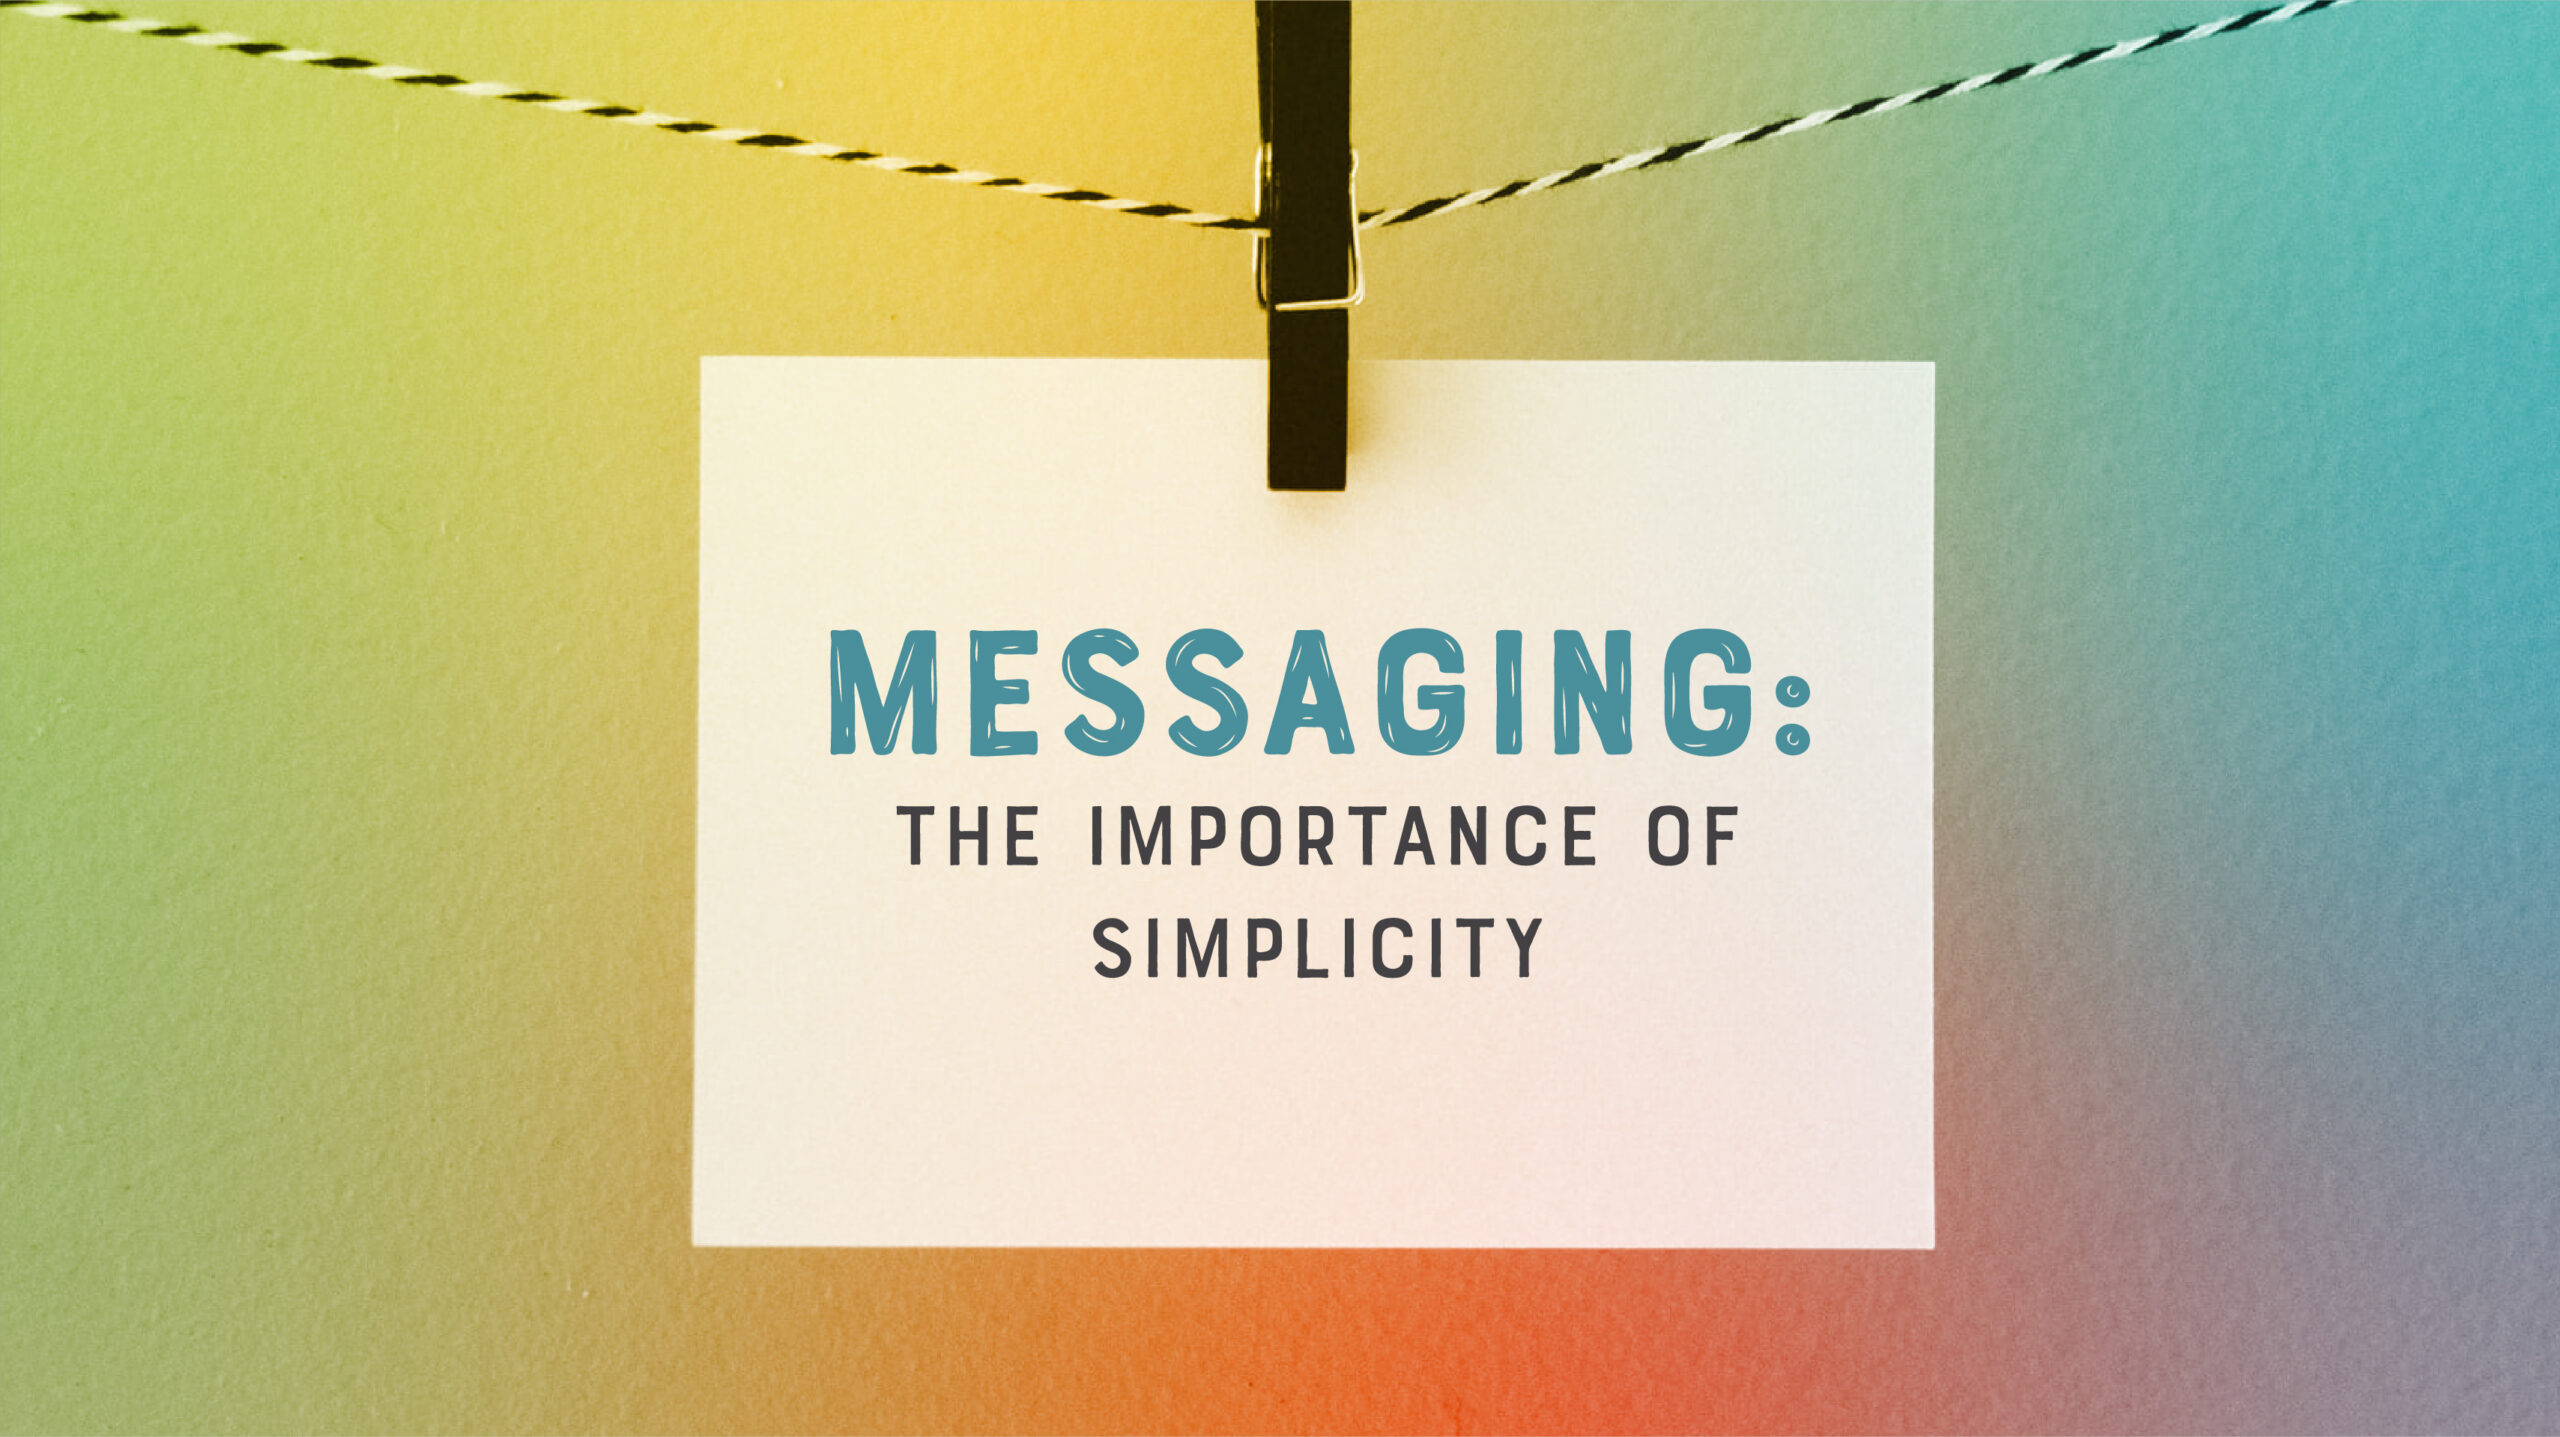 Messaging: The Importance of Simplicity